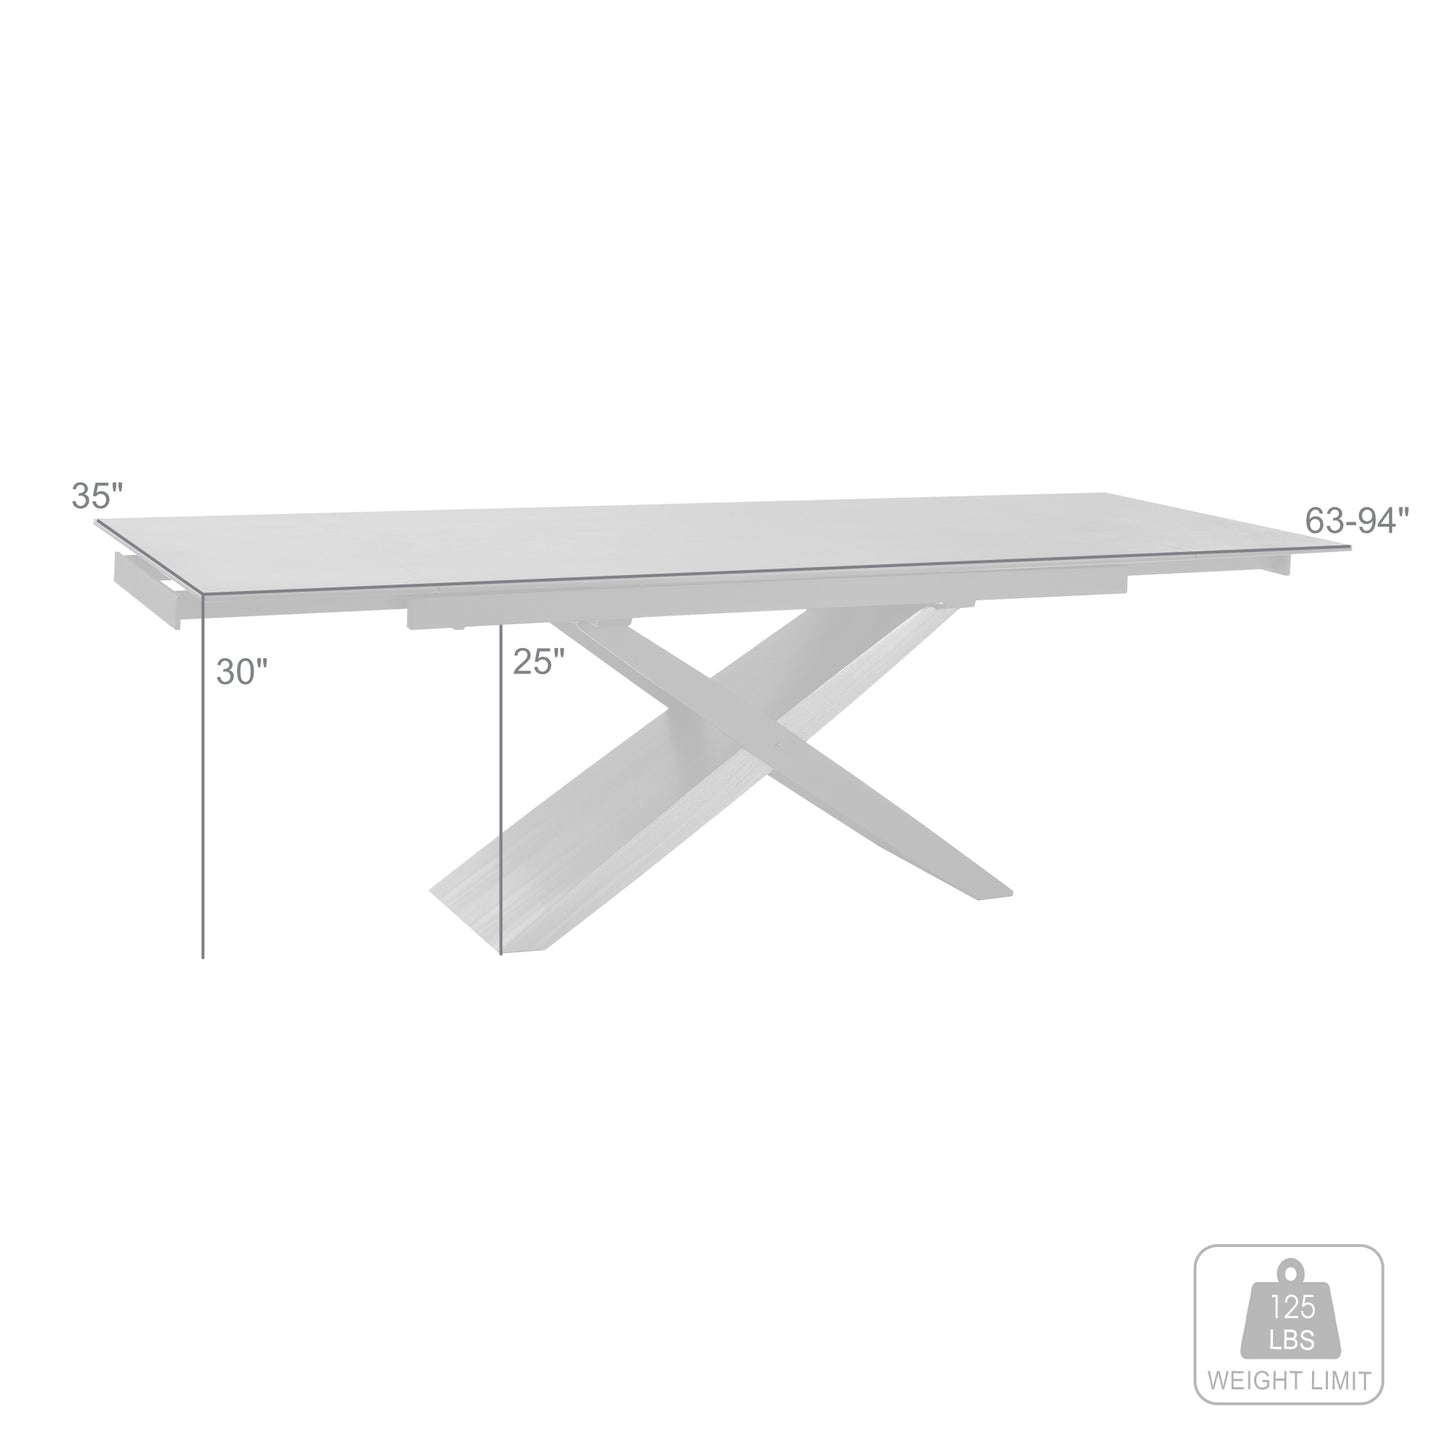 Milena Extendable Dining Table in Stone and Wood